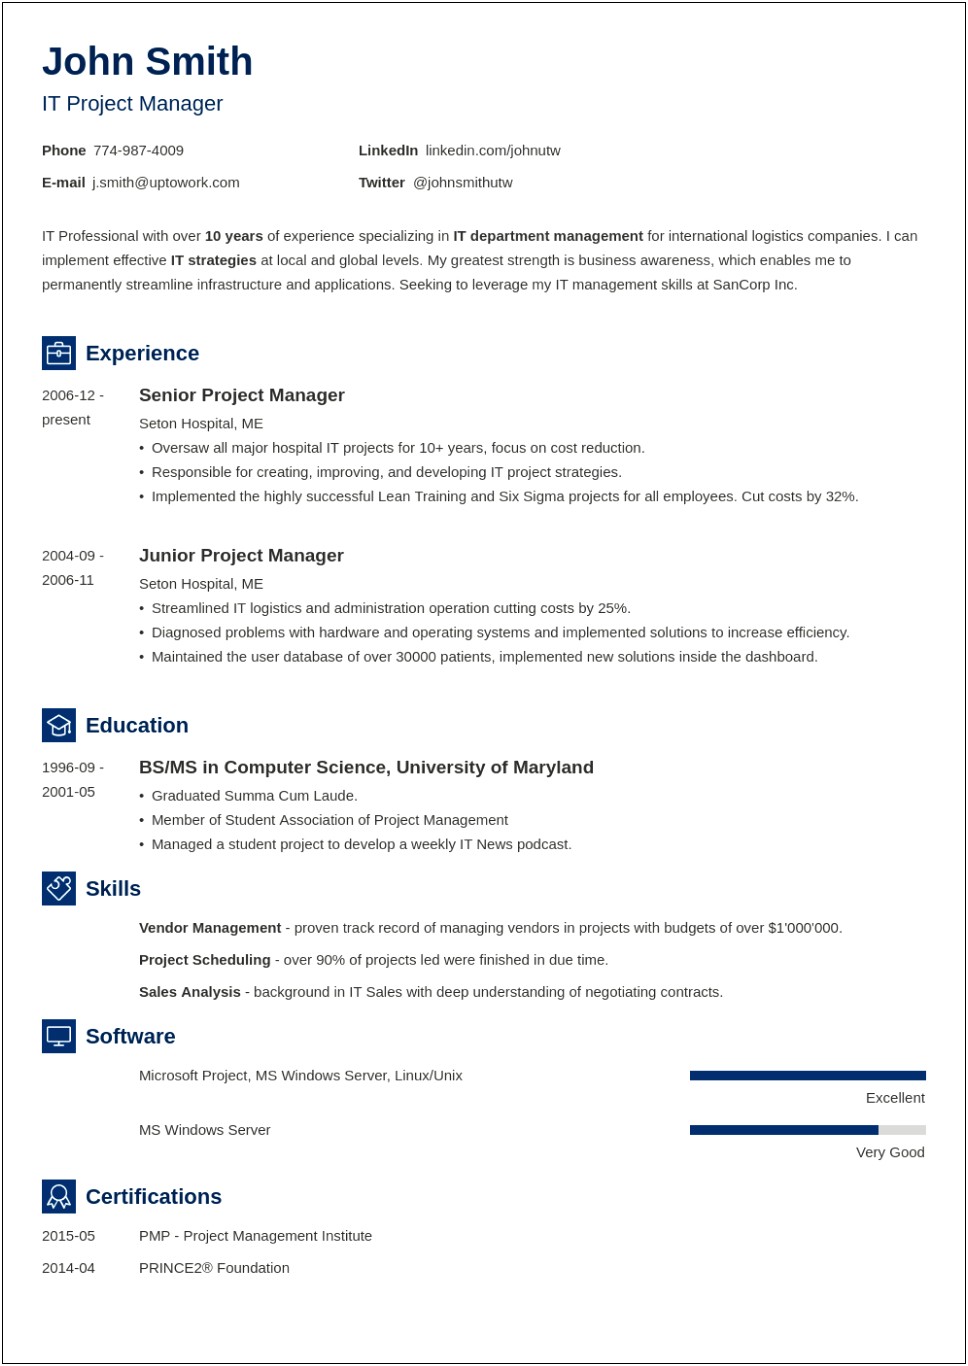 Apply With Resume Jobs Near Me